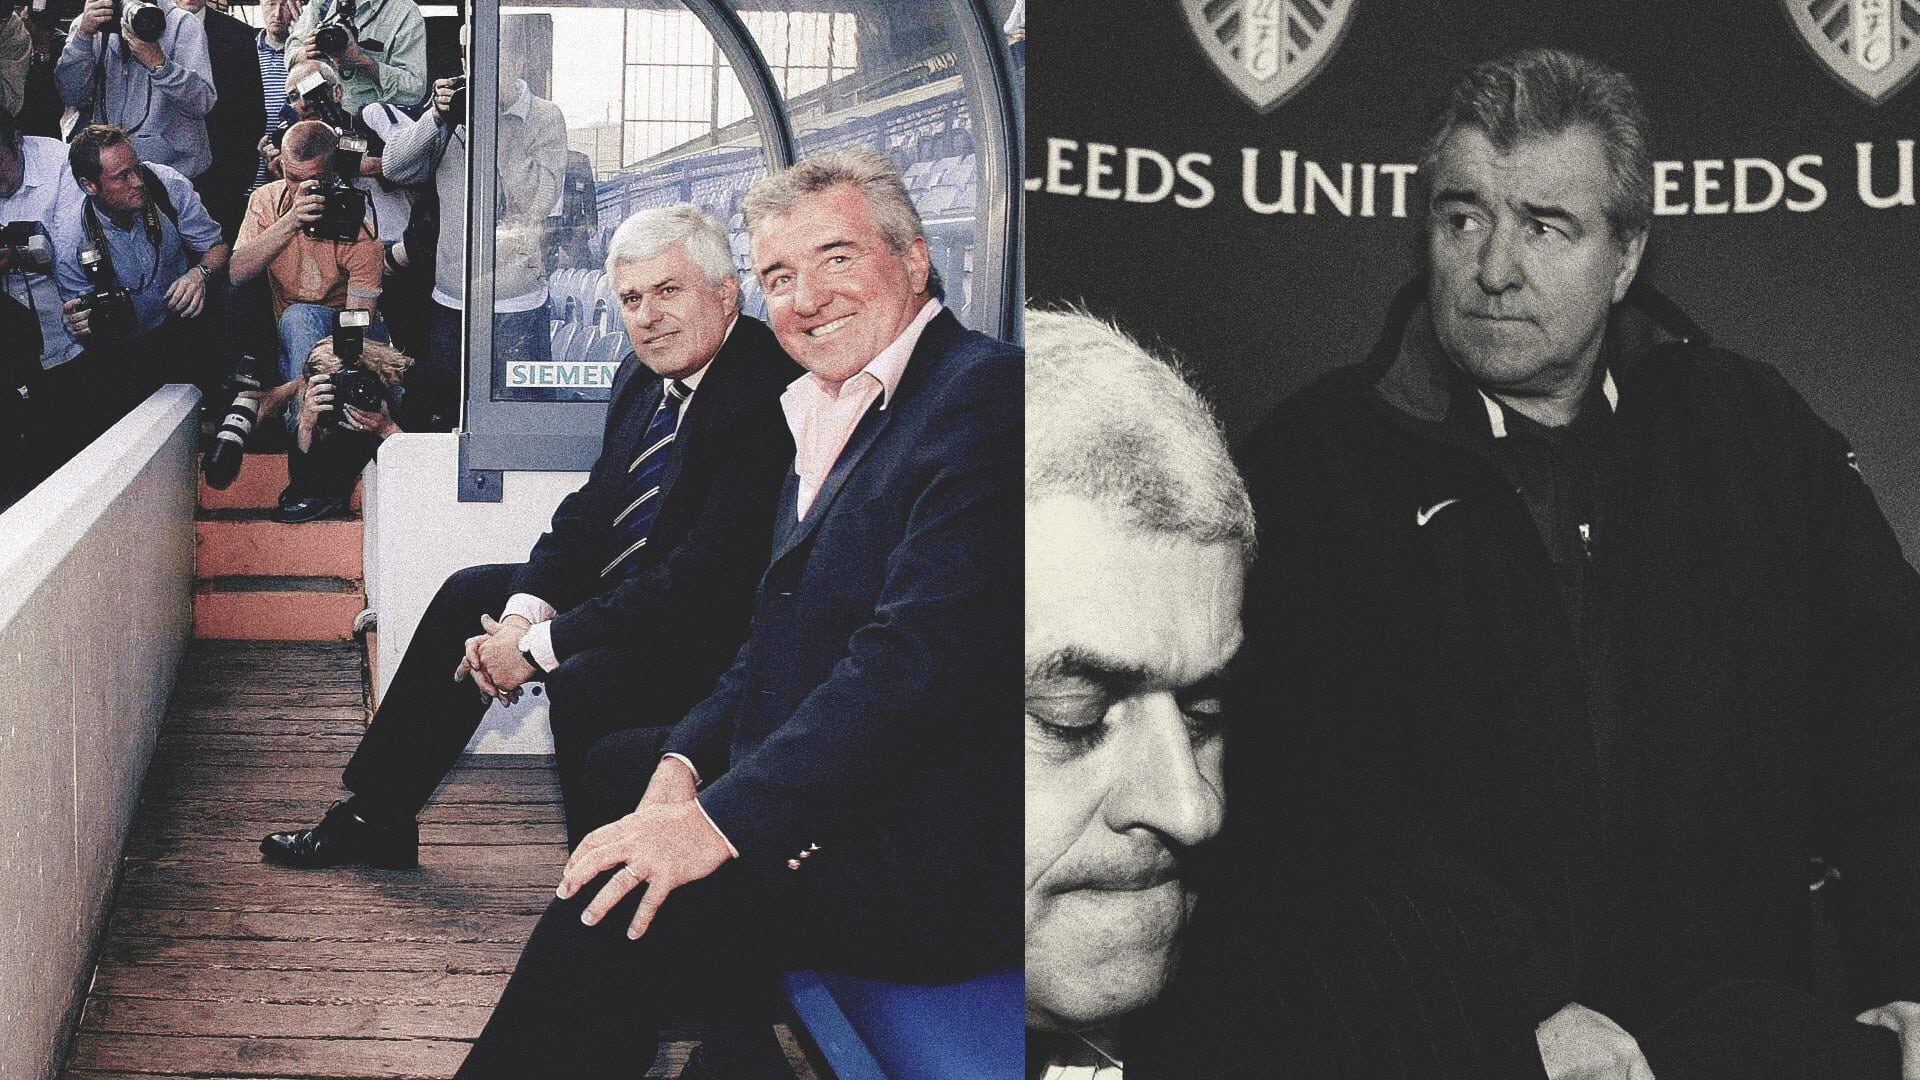 A split image, showing Peter Ridsdale and Terry Venables smiling in the dugout at a photocall for the latter's arrival at Leeds; then the pair of them looking pained at the press conference when Woodgate was sold